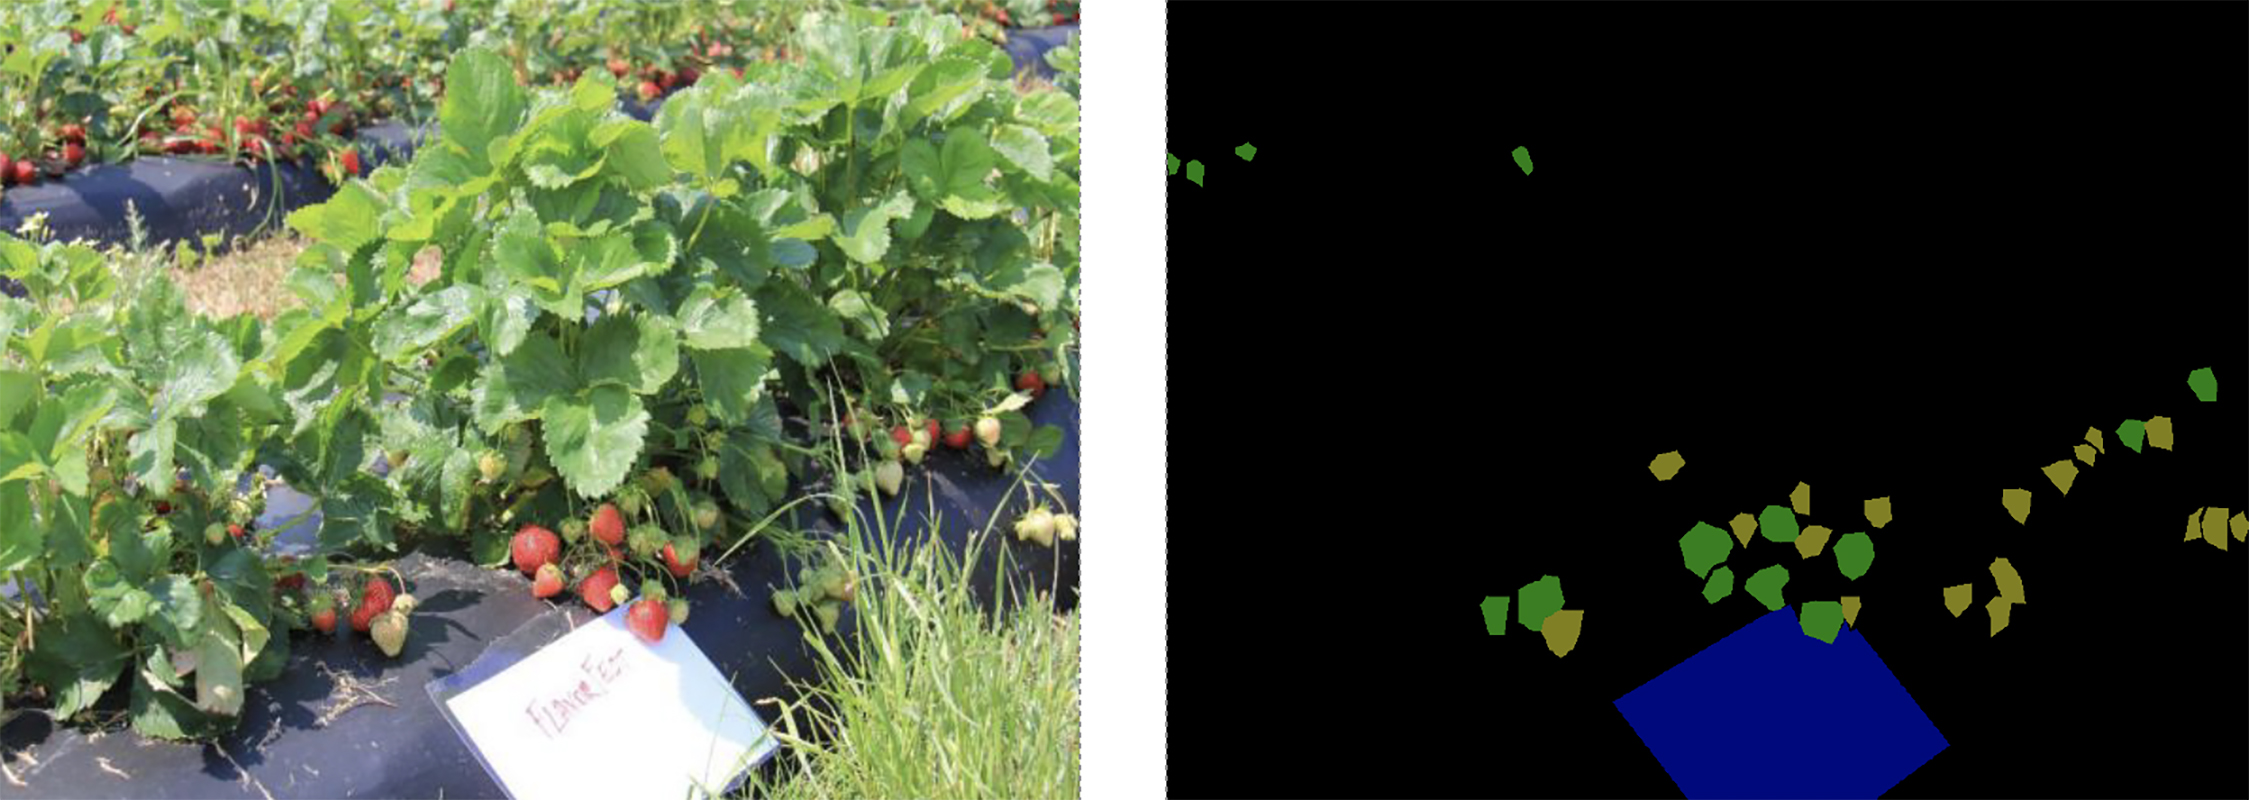 Fig. 2 from the paper. Left: Photo of plants in a strawberry field. Right: The corresponding labeled image showing ripe (green) and unripe (yellow) strawberries.